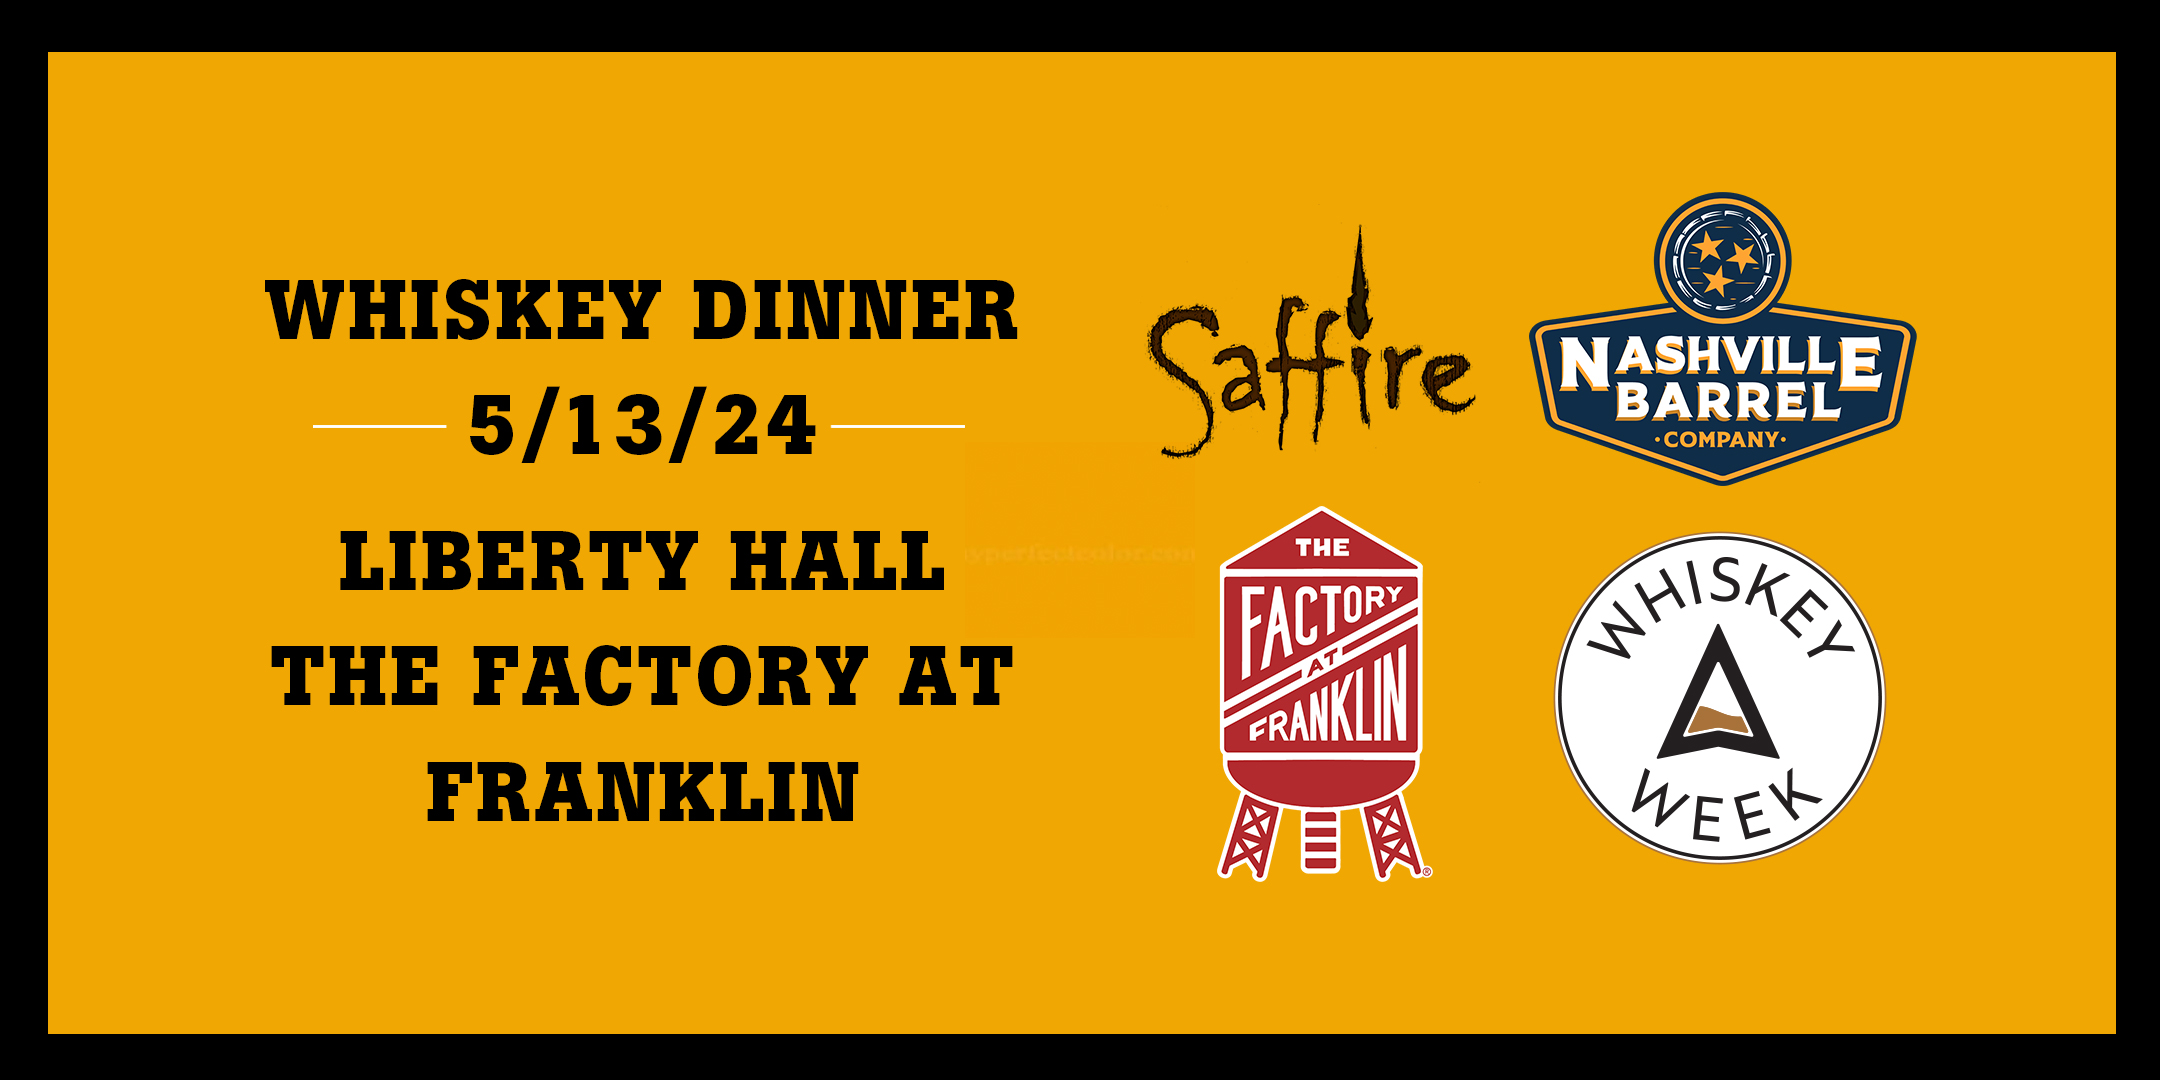 Whiskey Dinner in downtown Franklin, TN at Saffire Restaurant with Nashville Barrel Company.